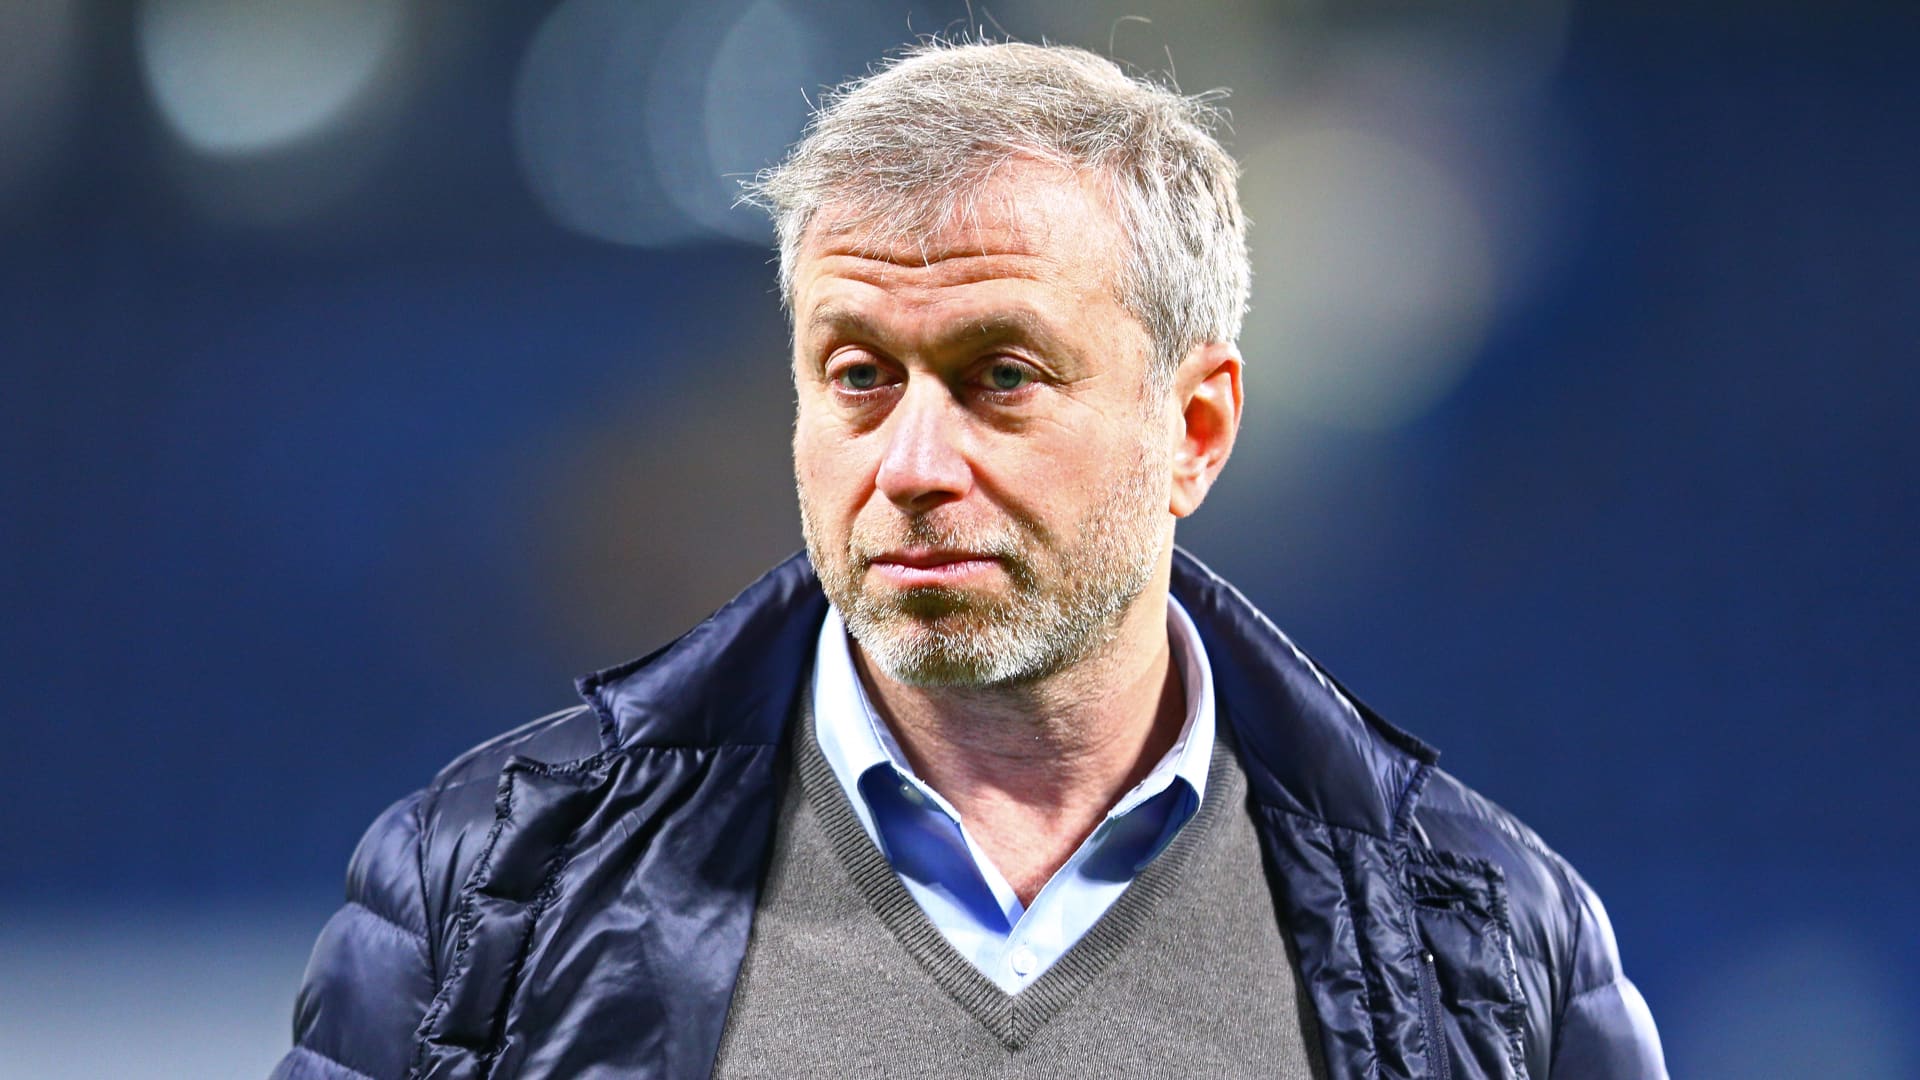 Chelsea owner Roman Abramovich looks on after their 3-1 win in the Barclays Premier League match between Chelsea and Sunderland at Stamford Bridge on December 19, 2015 in London, England.